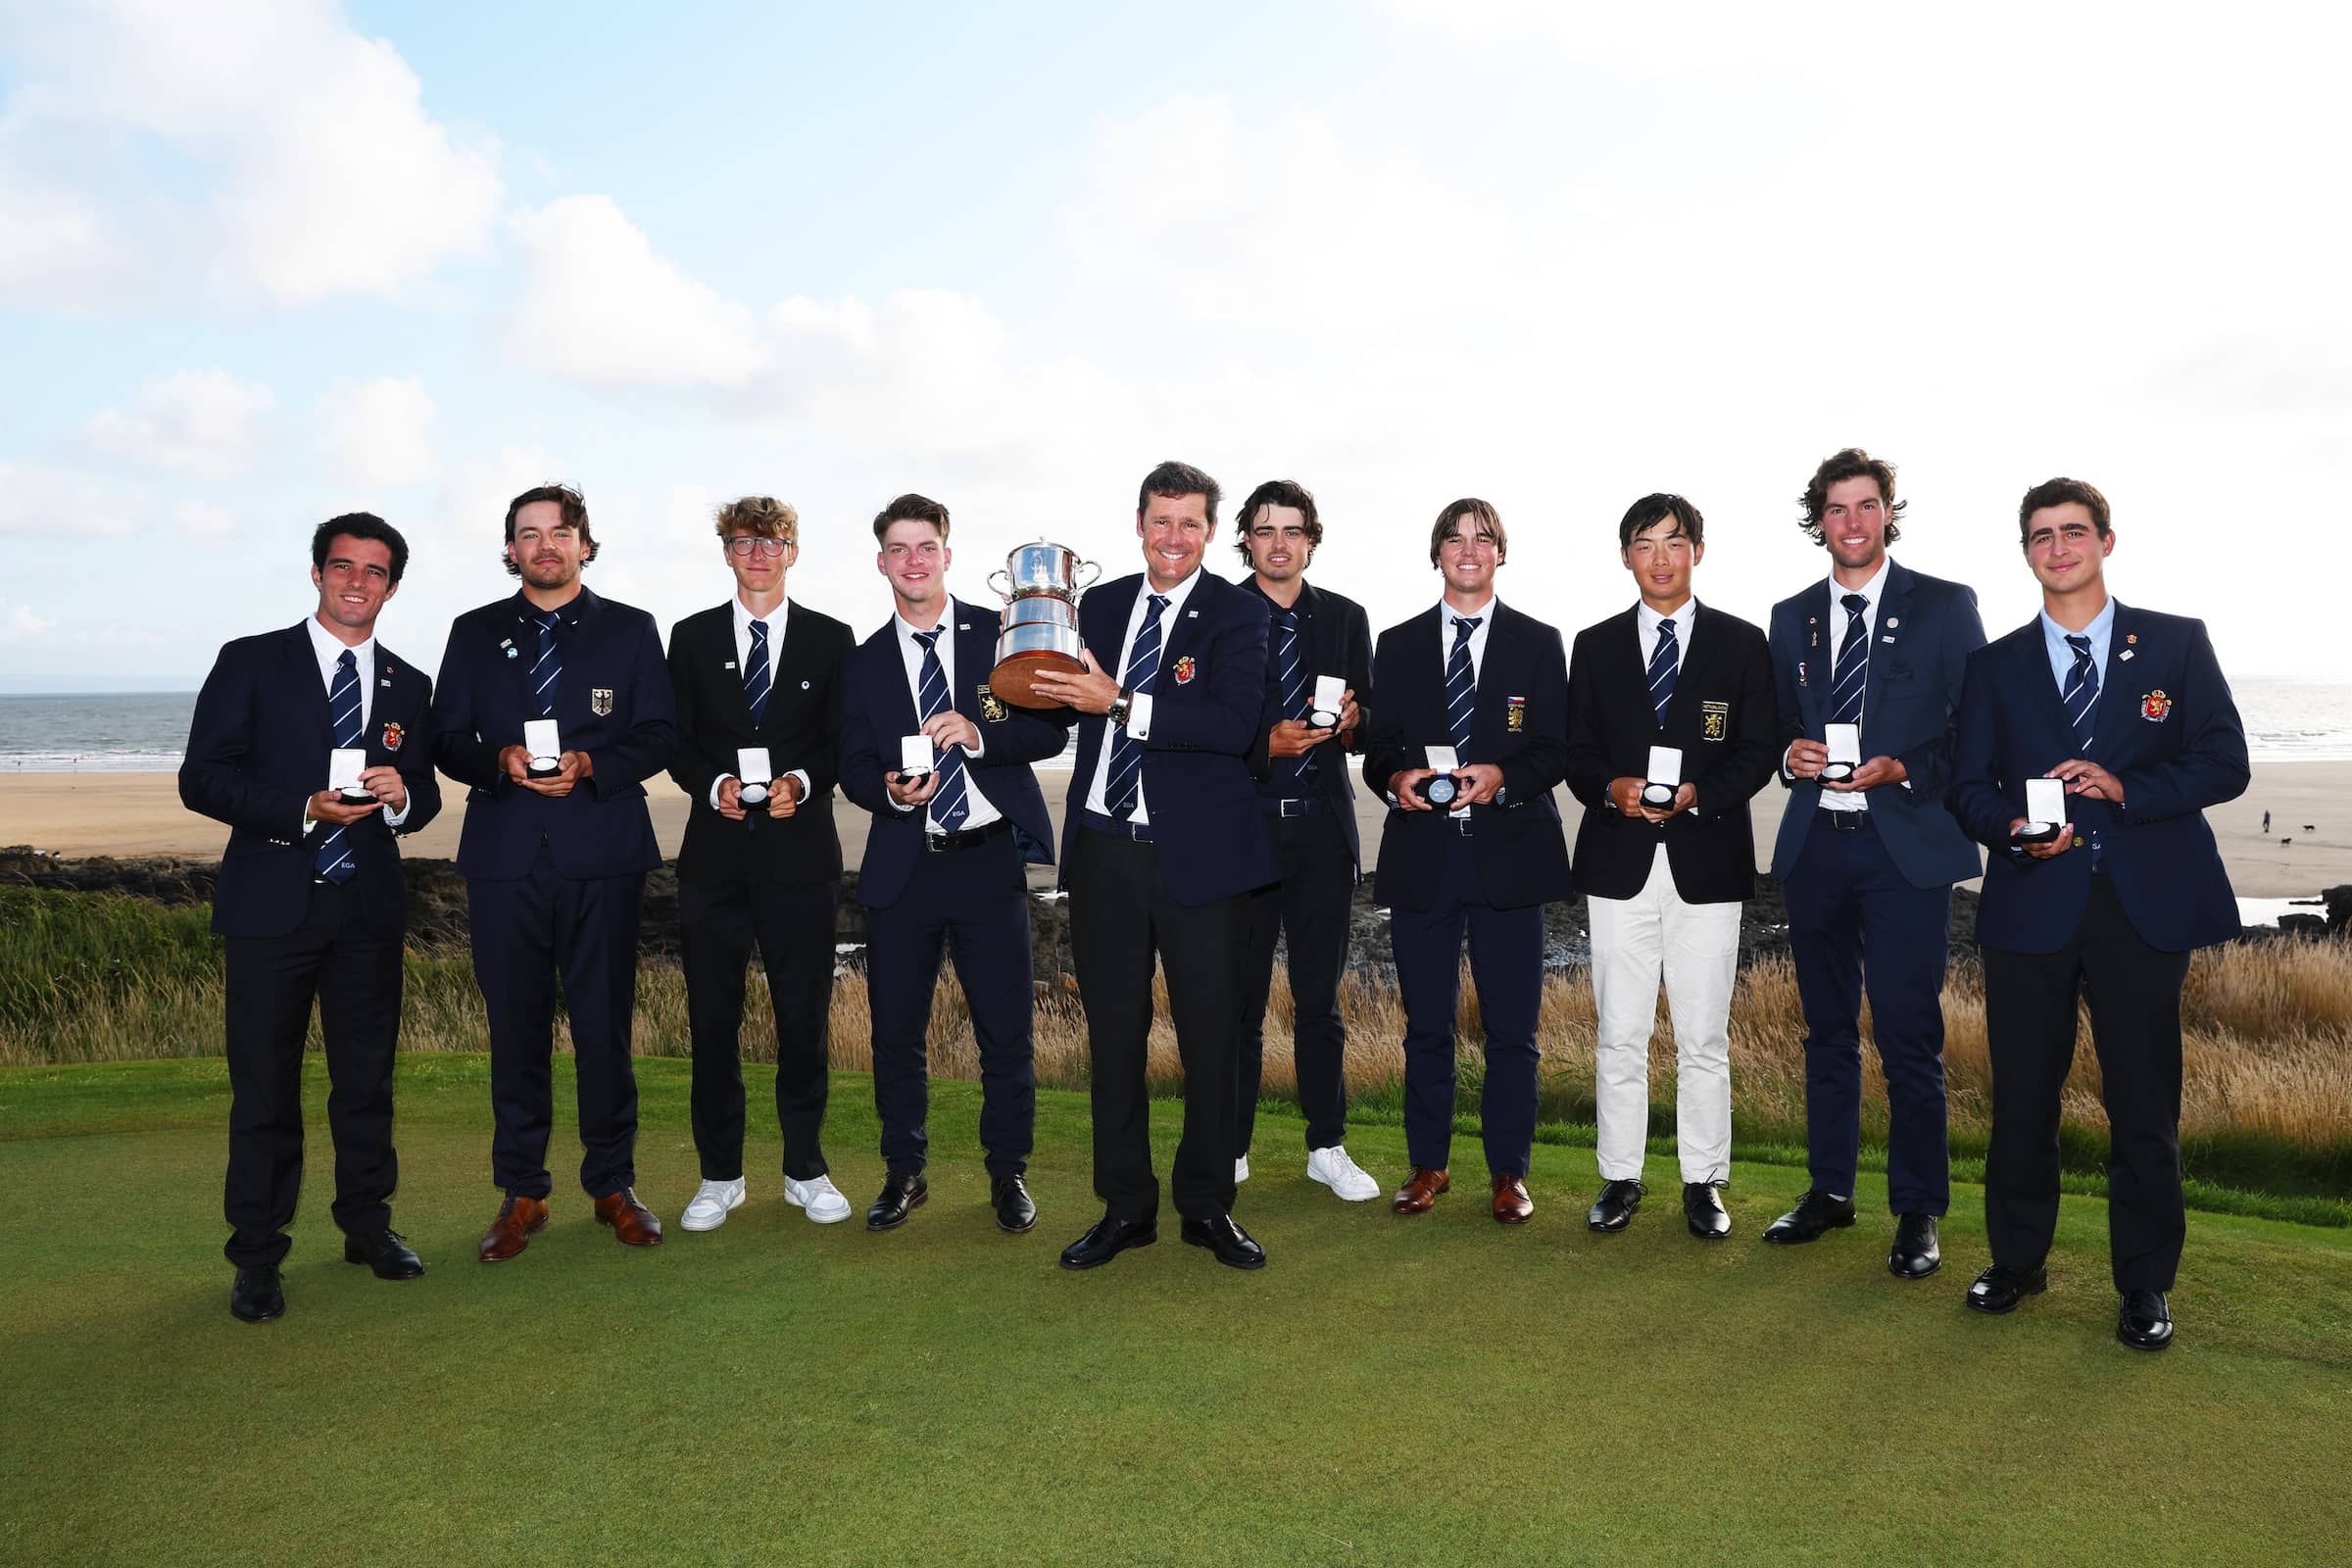 The Continent of Europe won the St Andrews Trophy at Royal Porthcawl in Wales.